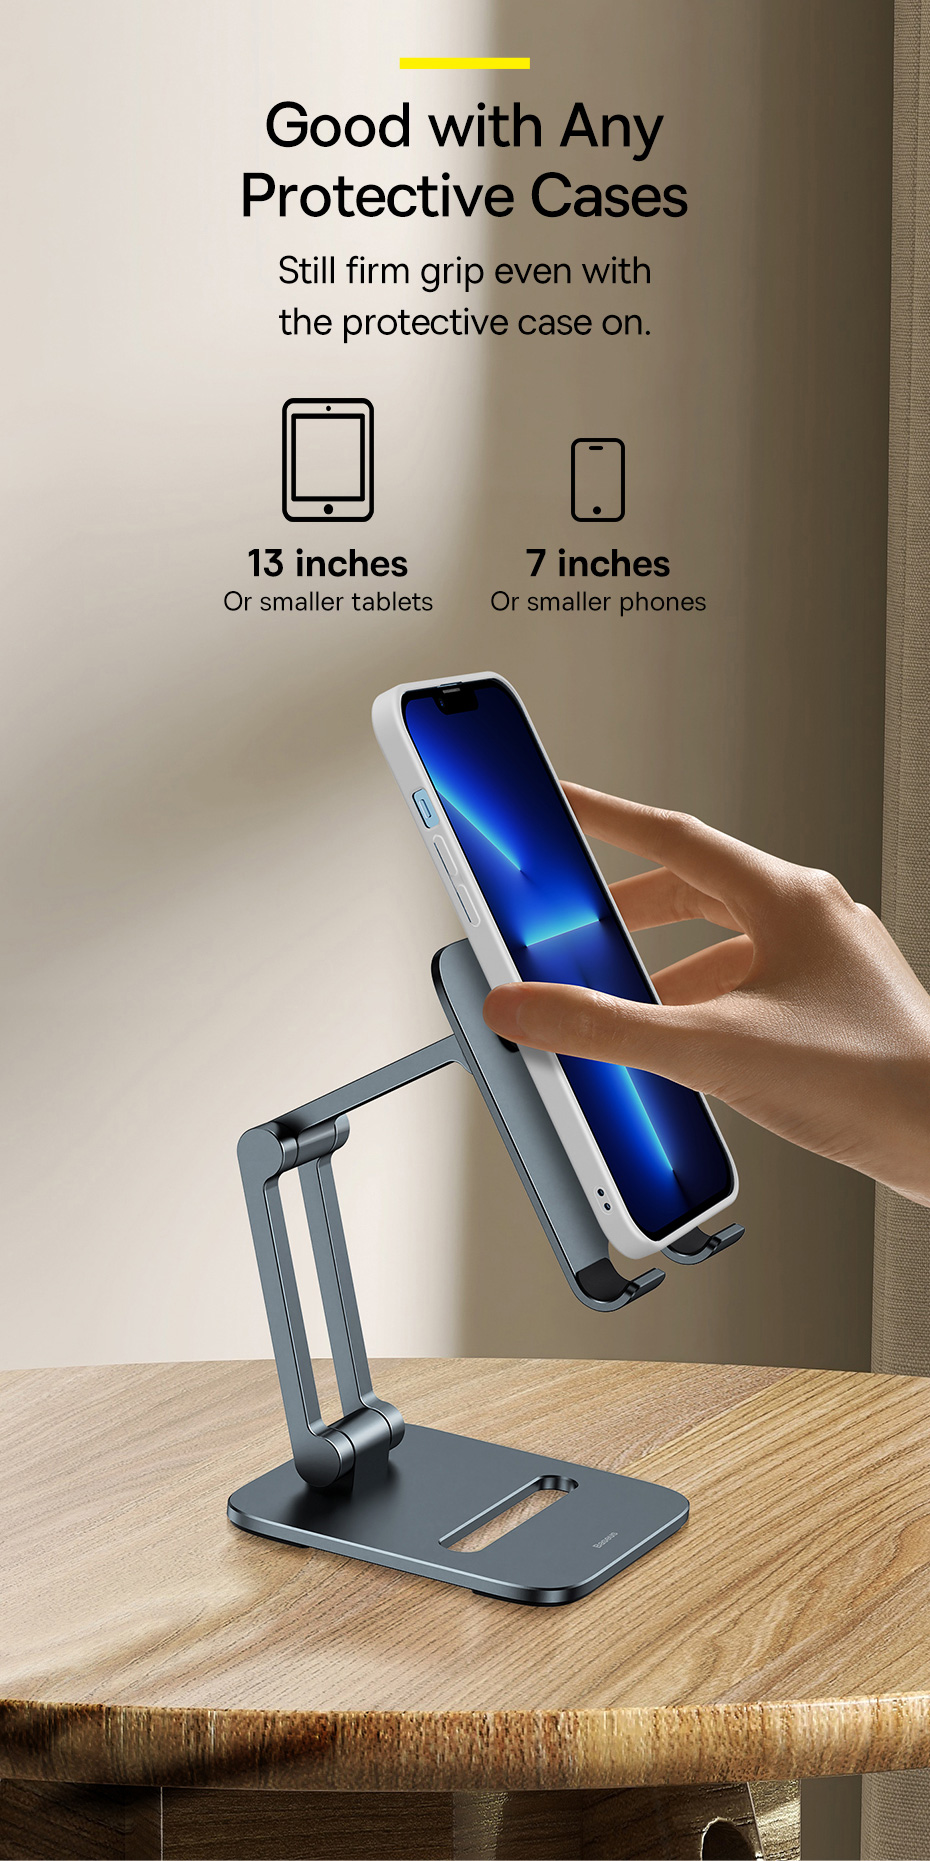 Baseus-Phone-Holder-Desk-Double-Axis-Foldable-Metal-Stand-for-iPad-Pro-Air-Tablet-1975775-15